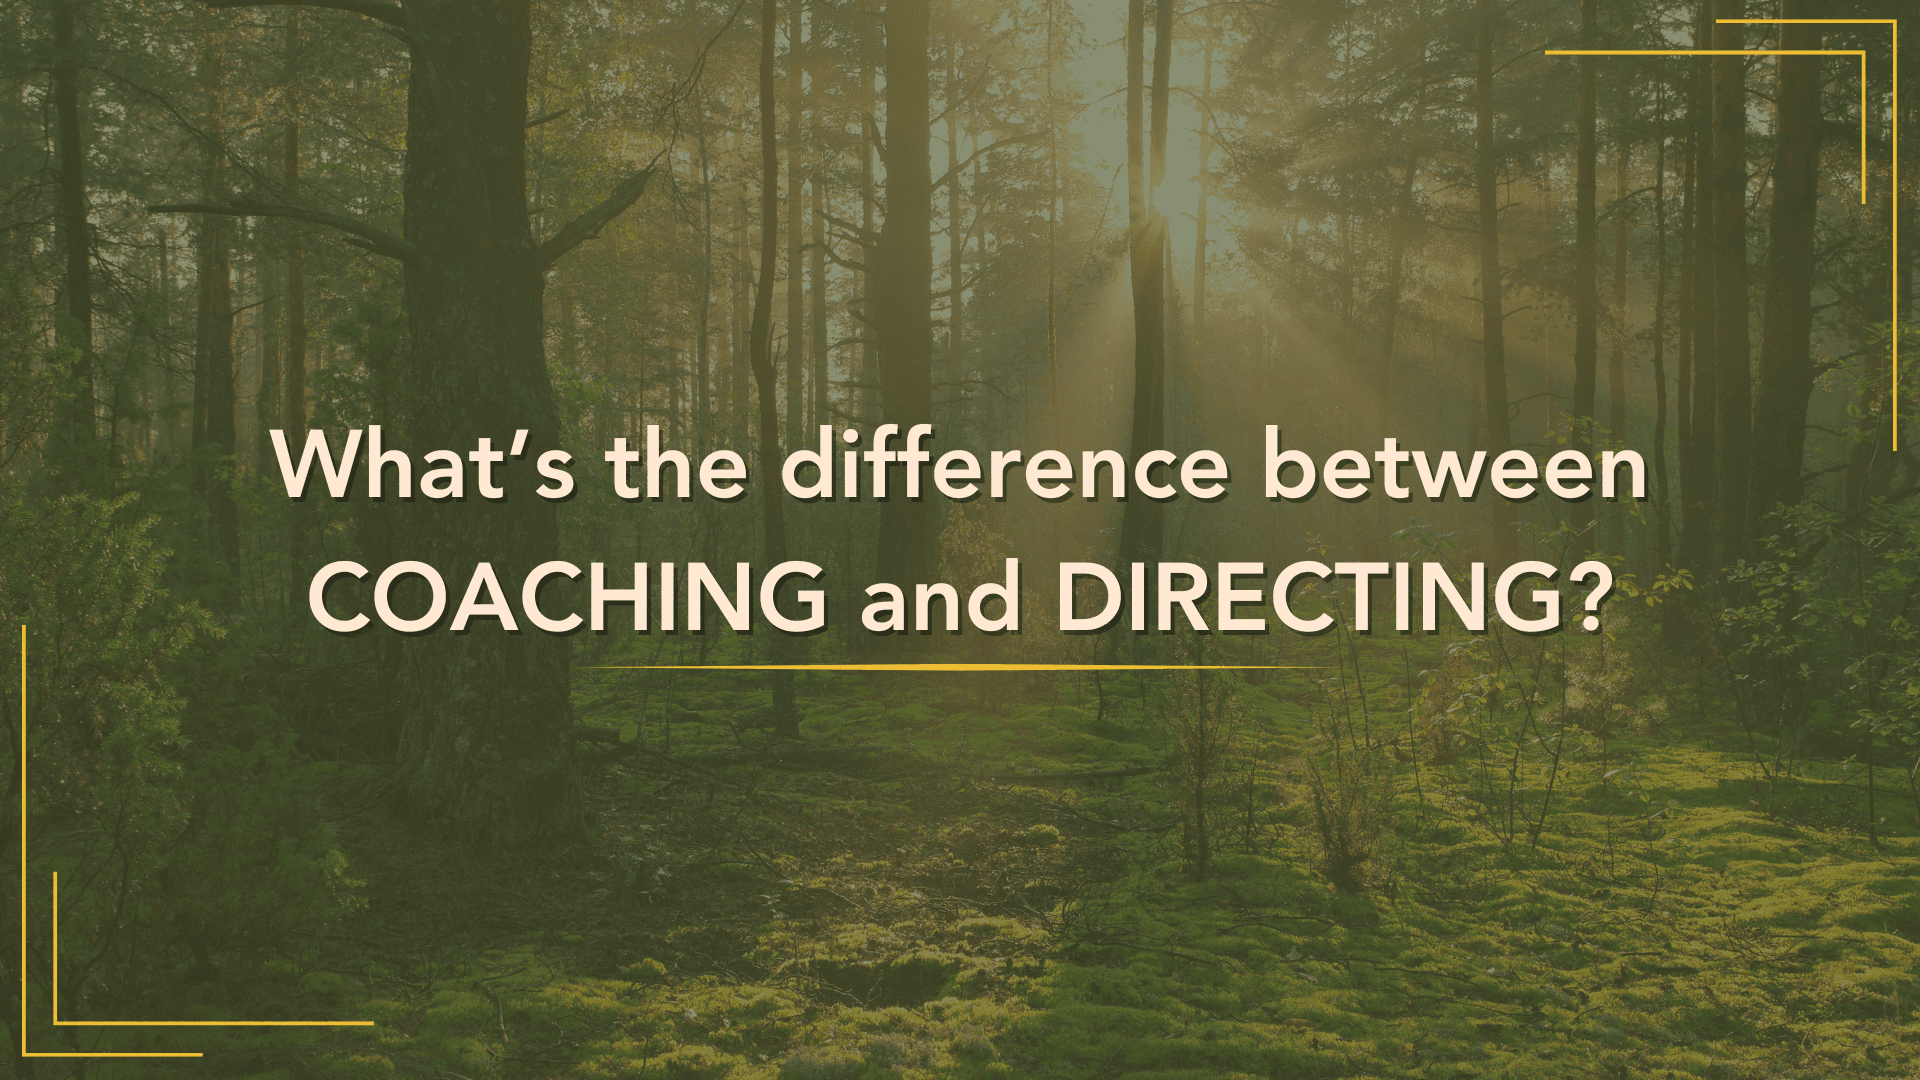 Coaching vs. Directing: What’s the difference?